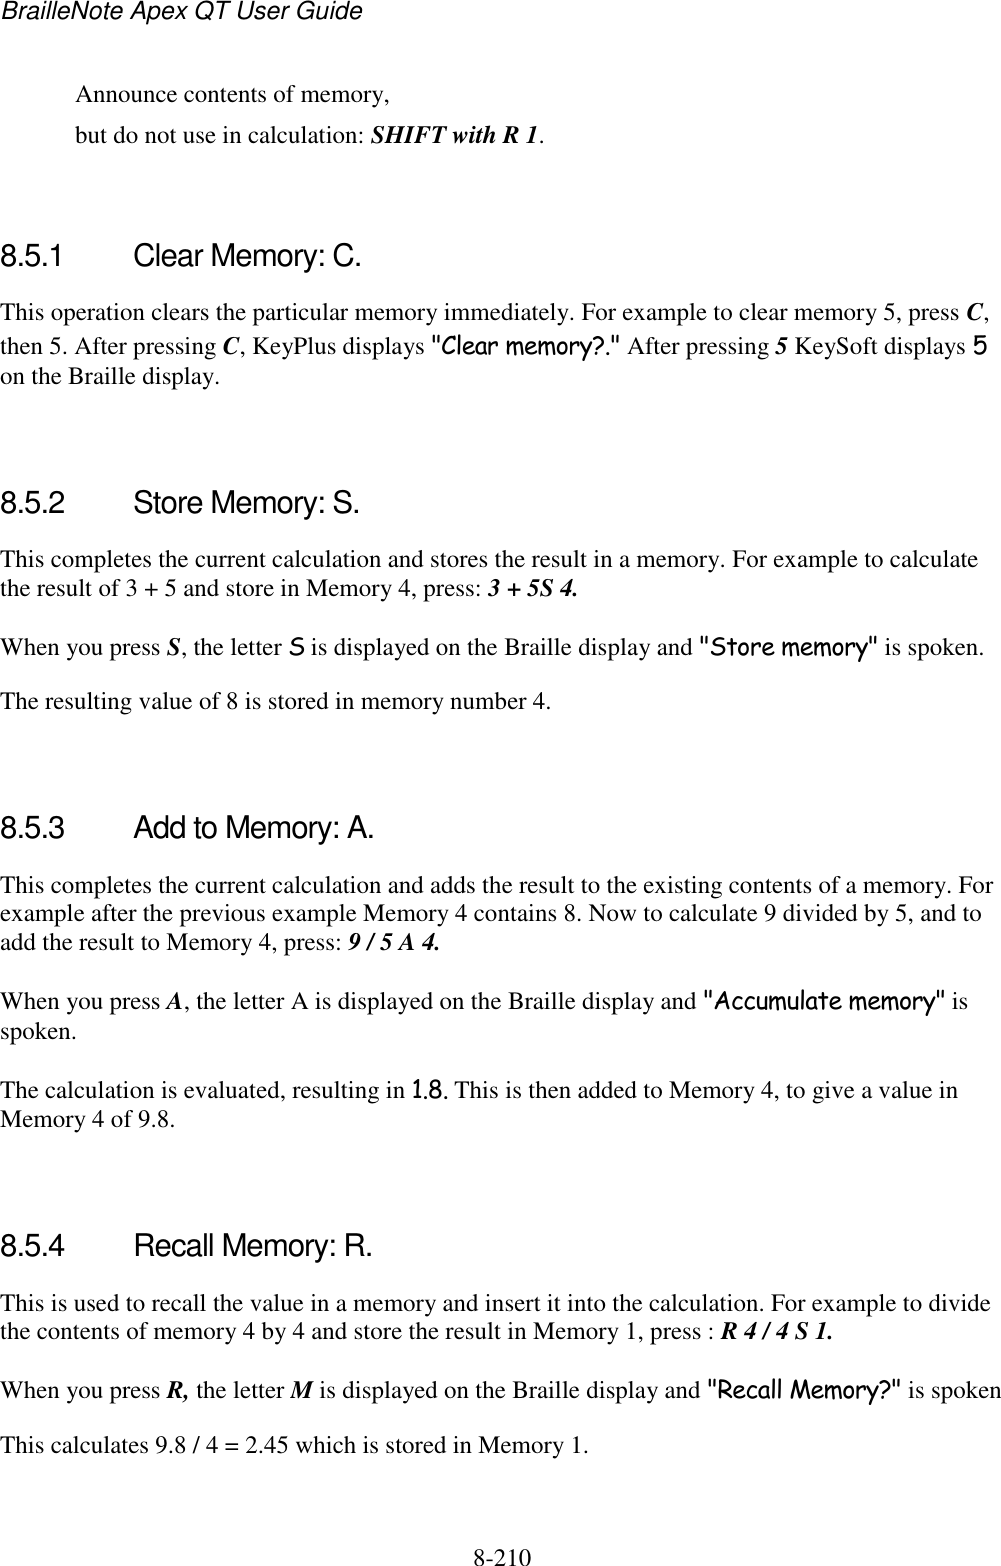 BrailleNote Apex QT User Guide  8-210     Announce contents of memory,   but do not use in calculation: SHIFT with R 1.   8.5.1  Clear Memory: C. This operation clears the particular memory immediately. For example to clear memory 5, press C, then 5. After pressing C, KeyPlus displays &quot;Clear memory?.&quot; After pressing 5 KeySoft displays 5 on the Braille display.   8.5.2  Store Memory: S. This completes the current calculation and stores the result in a memory. For example to calculate the result of 3 + 5 and store in Memory 4, press: 3 + 5S 4. When you press S, the letter S is displayed on the Braille display and &quot;Store memory&quot; is spoken. The resulting value of 8 is stored in memory number 4.   8.5.3  Add to Memory: A. This completes the current calculation and adds the result to the existing contents of a memory. For example after the previous example Memory 4 contains 8. Now to calculate 9 divided by 5, and to add the result to Memory 4, press: 9 / 5 A 4. When you press A, the letter A is displayed on the Braille display and &quot;Accumulate memory&quot; is spoken. The calculation is evaluated, resulting in 1.8. This is then added to Memory 4, to give a value in Memory 4 of 9.8.   8.5.4  Recall Memory: R. This is used to recall the value in a memory and insert it into the calculation. For example to divide the contents of memory 4 by 4 and store the result in Memory 1, press : R 4 / 4 S 1. When you press R, the letter M is displayed on the Braille display and &quot;Recall Memory?&quot; is spoken This calculates 9.8 / 4 = 2.45 which is stored in Memory 1.   